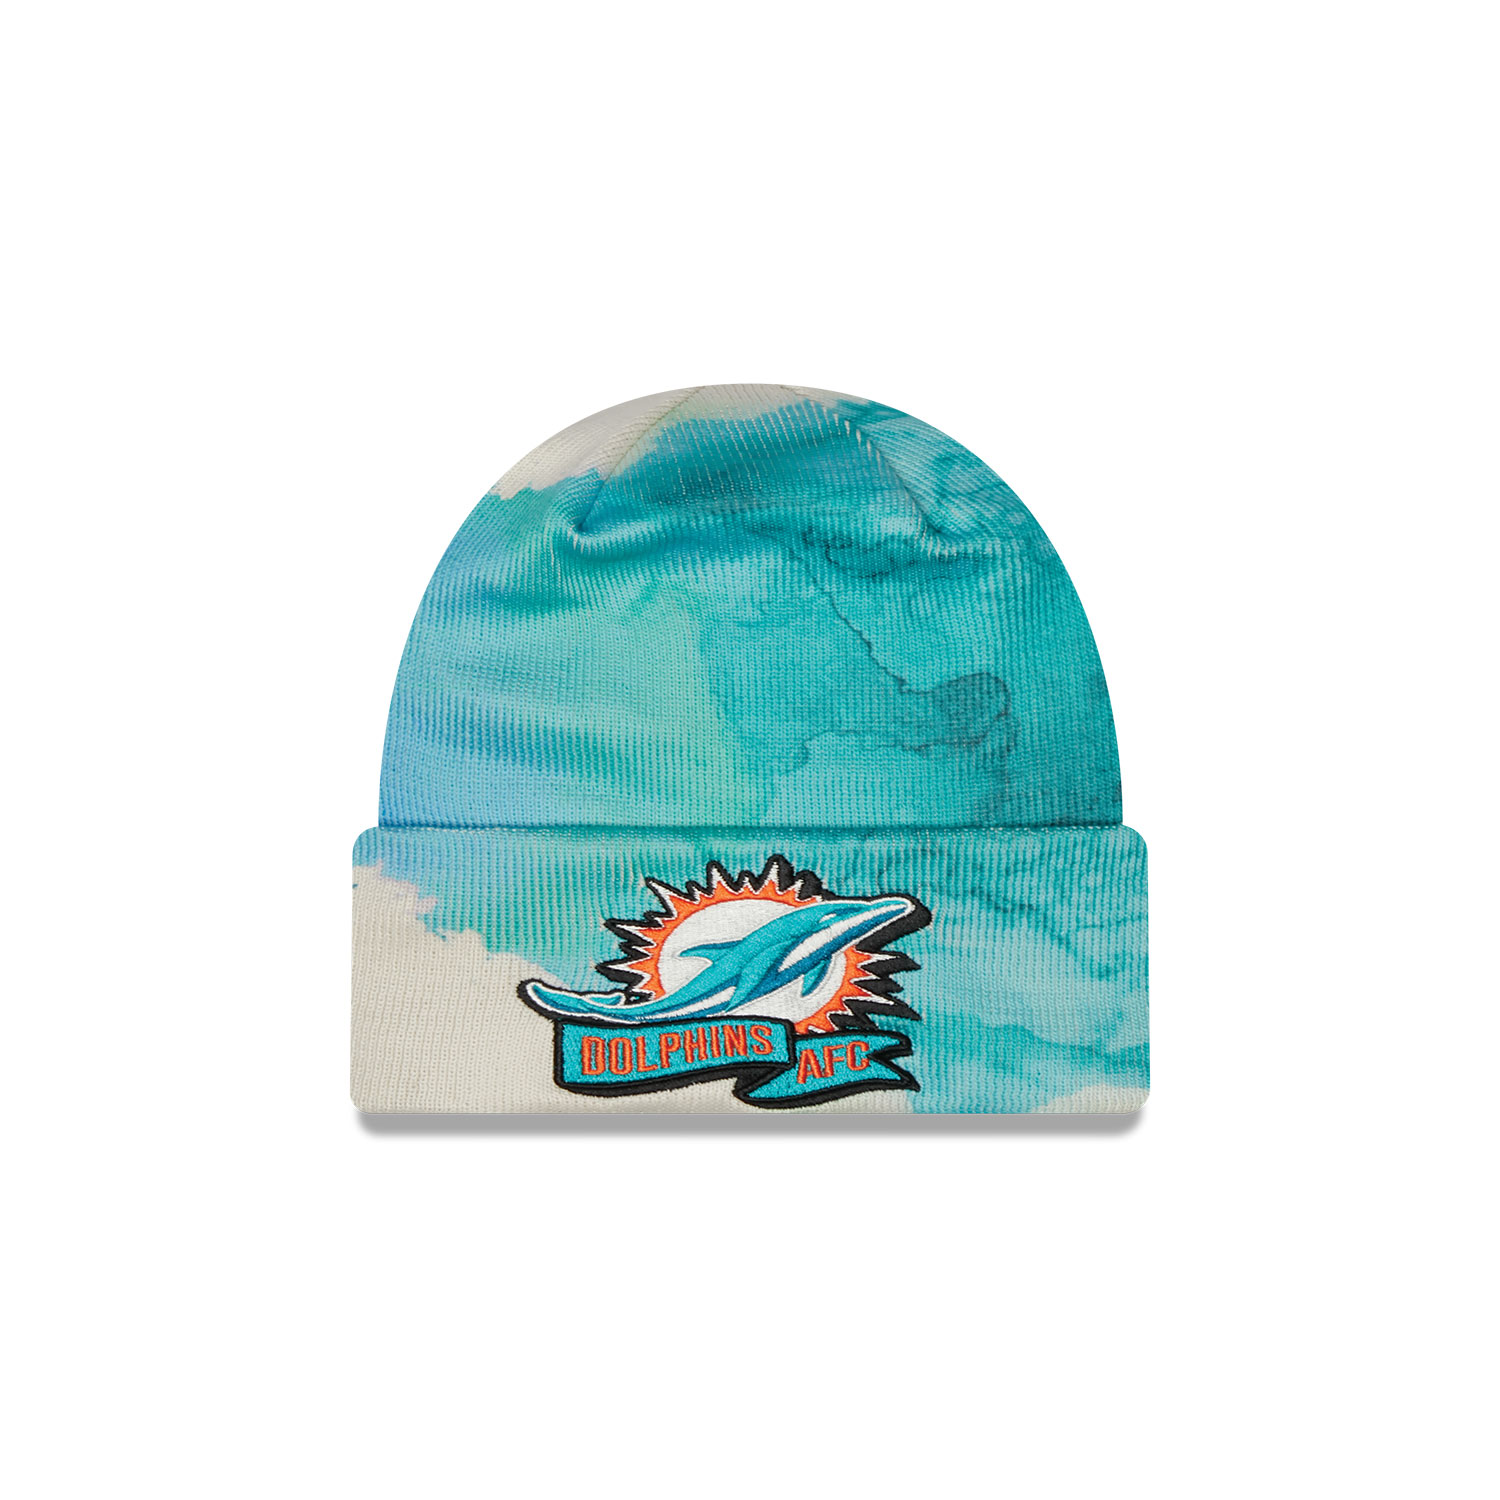 Miami Dolphins NFL Sideline Teal Beanie Hat